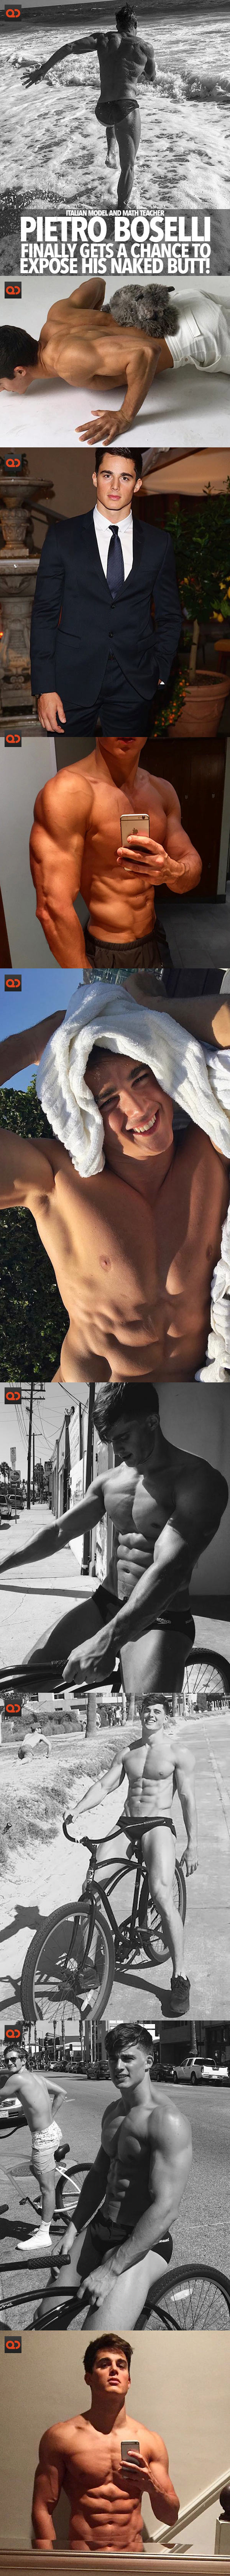 qc-pietro_boselli_finally_exposed_butt-collage01